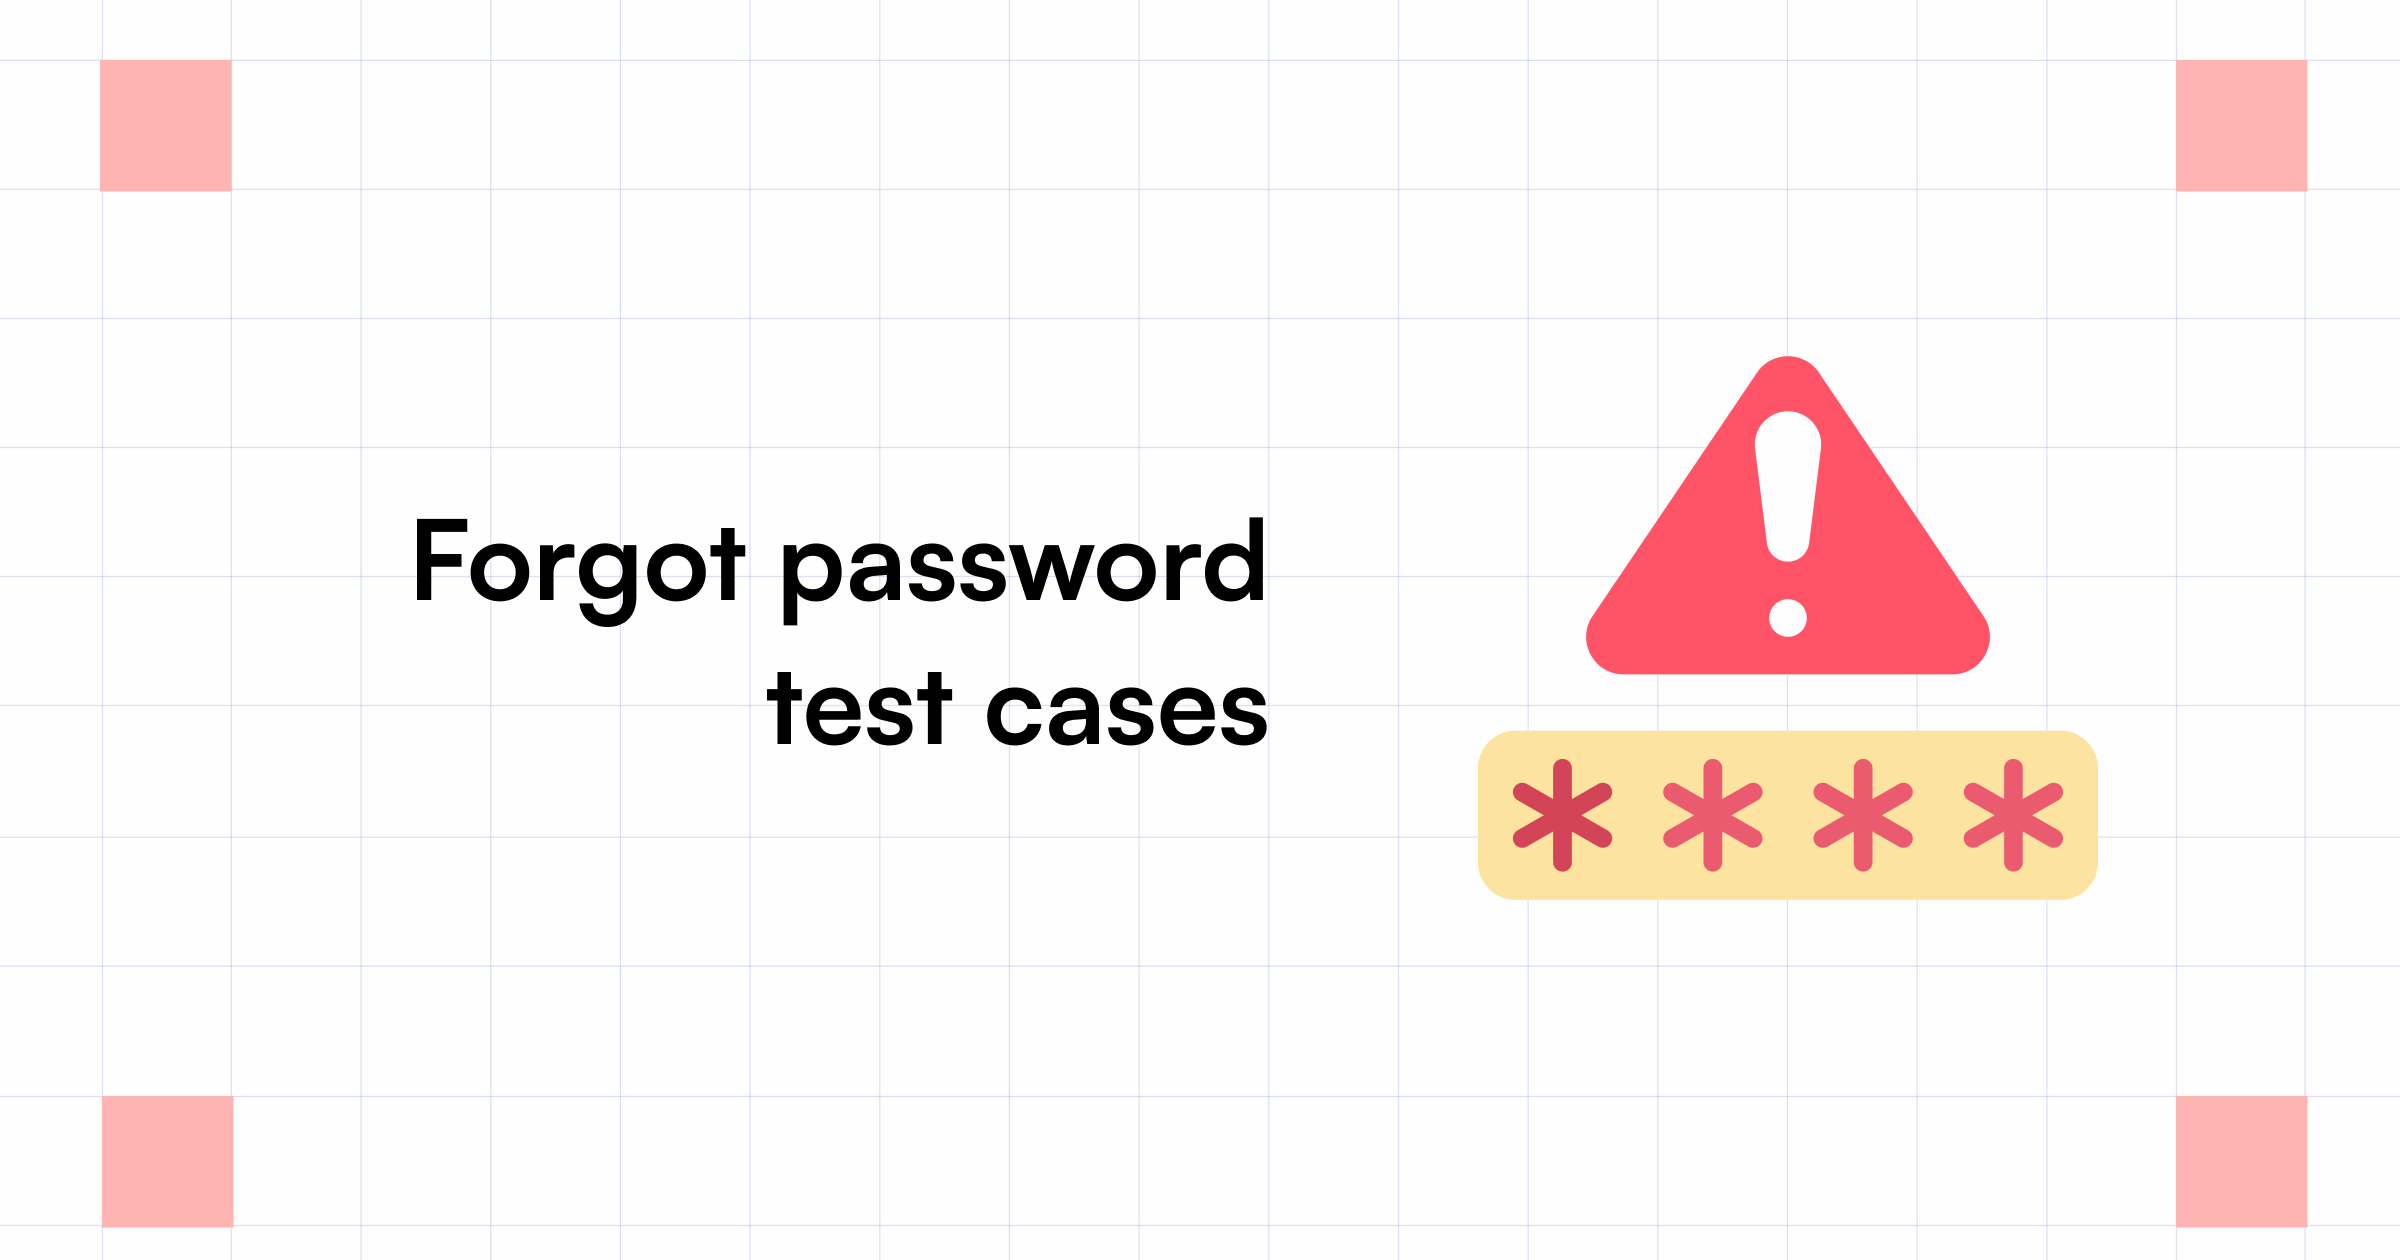 How to Write Test Cases For Forgot Password and Password